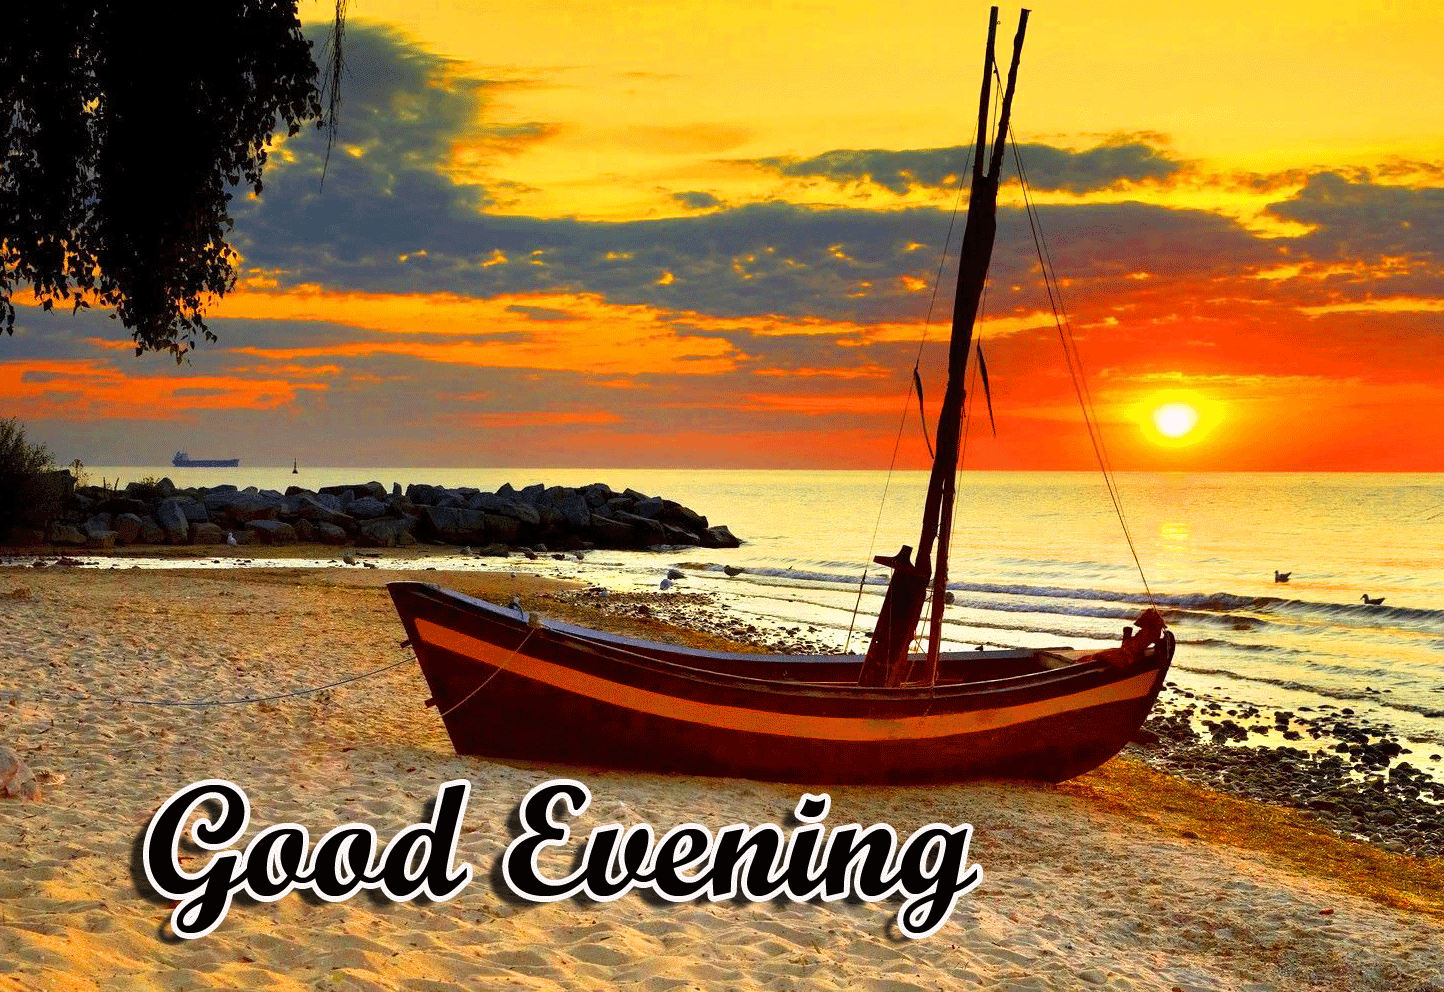 Good Evening Wishes Images Download 11